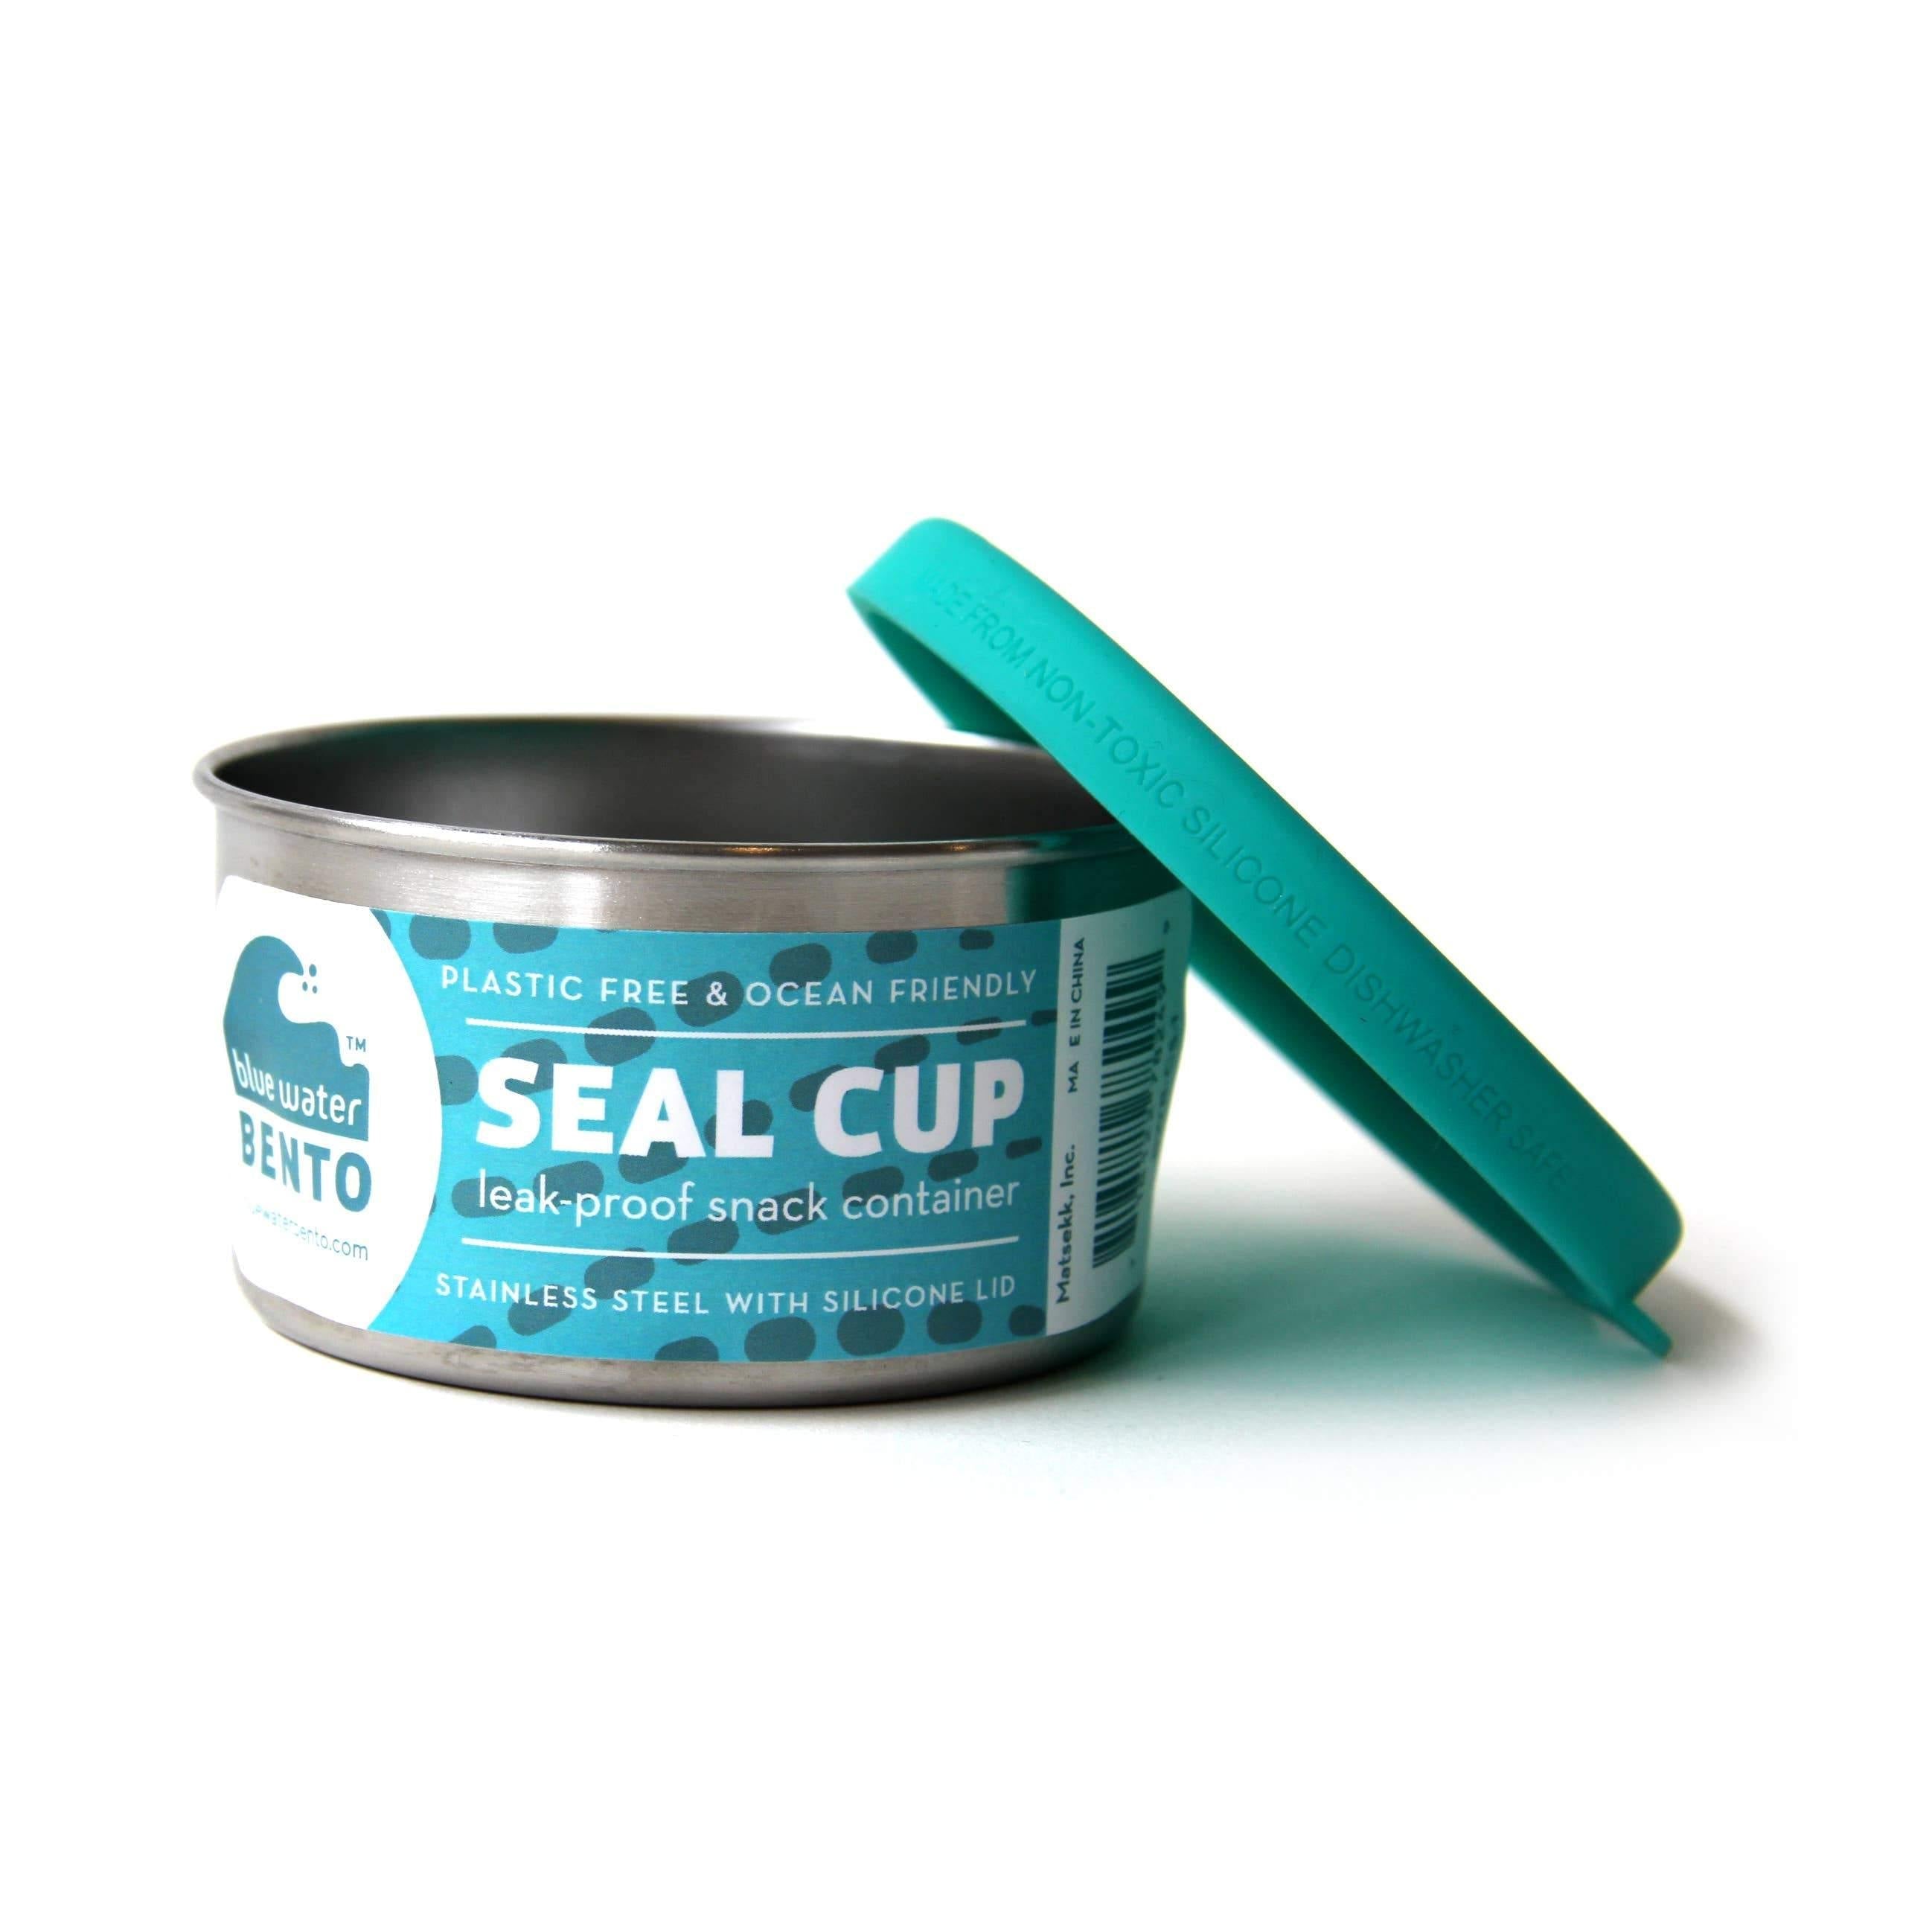 Blue Water Bento Seal Cup Solo, Food Container, ECOLunchbox, Defiance Outdoor Gear Co.